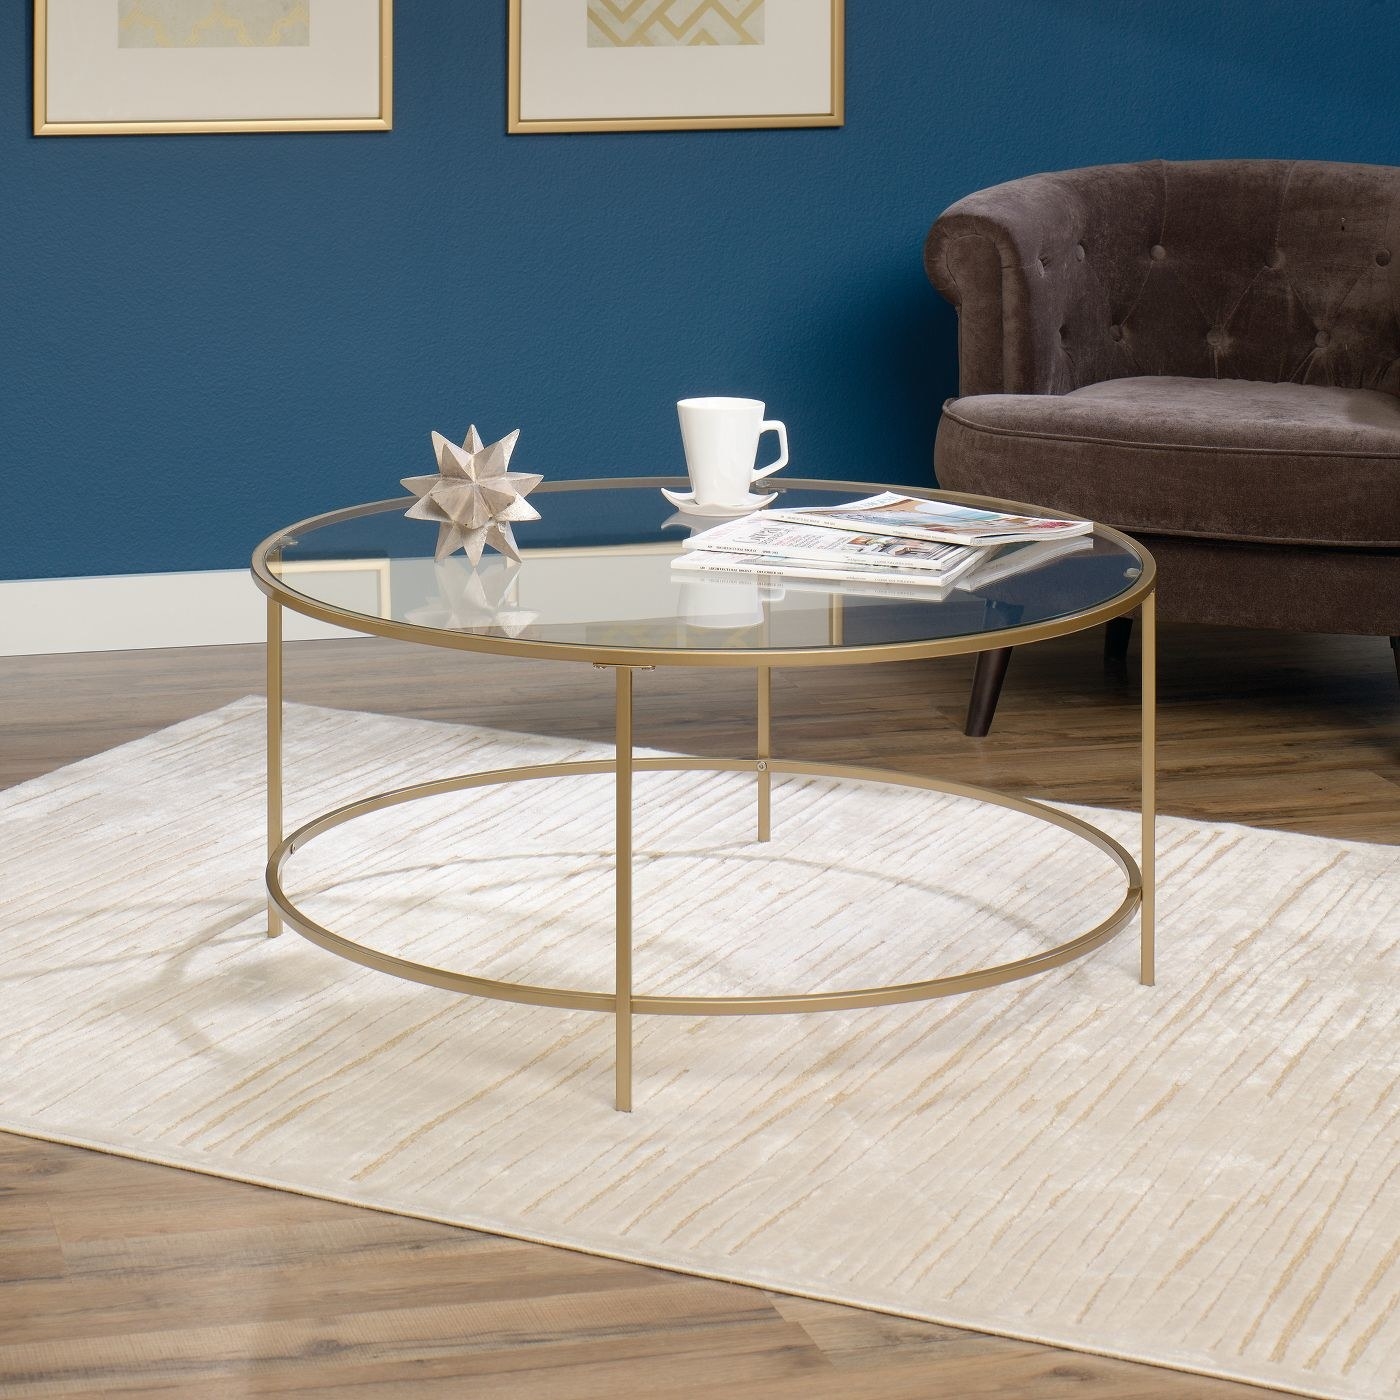 Circular table with gold metal frame and glass top